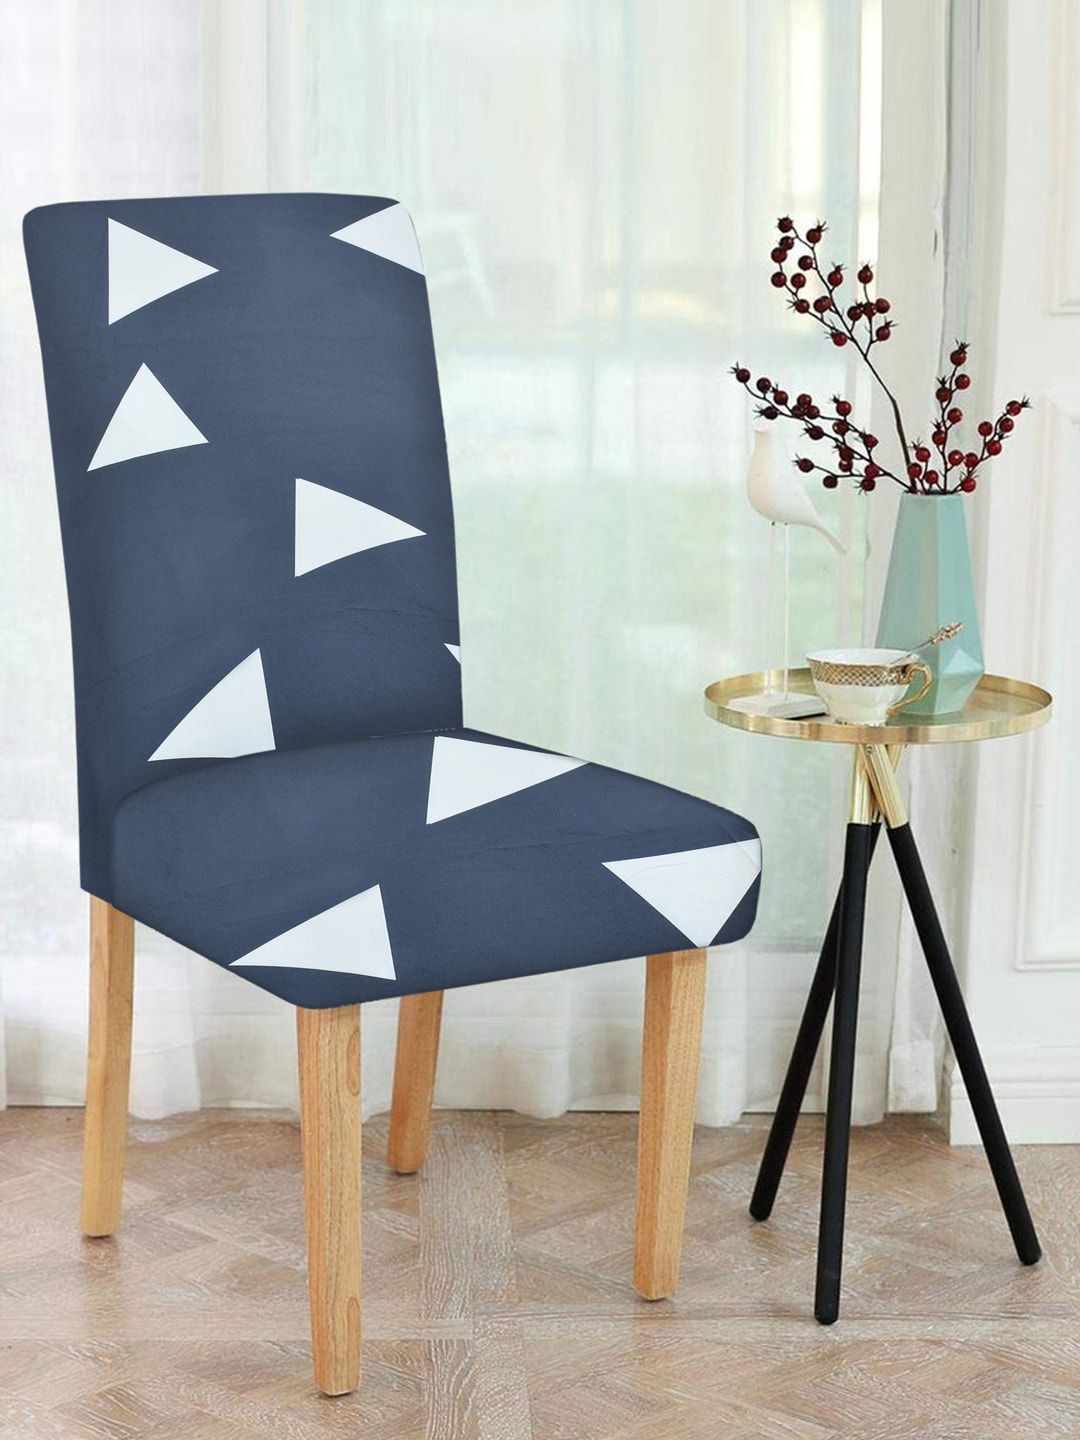 MULTITEX Grey Geometric Print Fitted Chair Cover Price in India